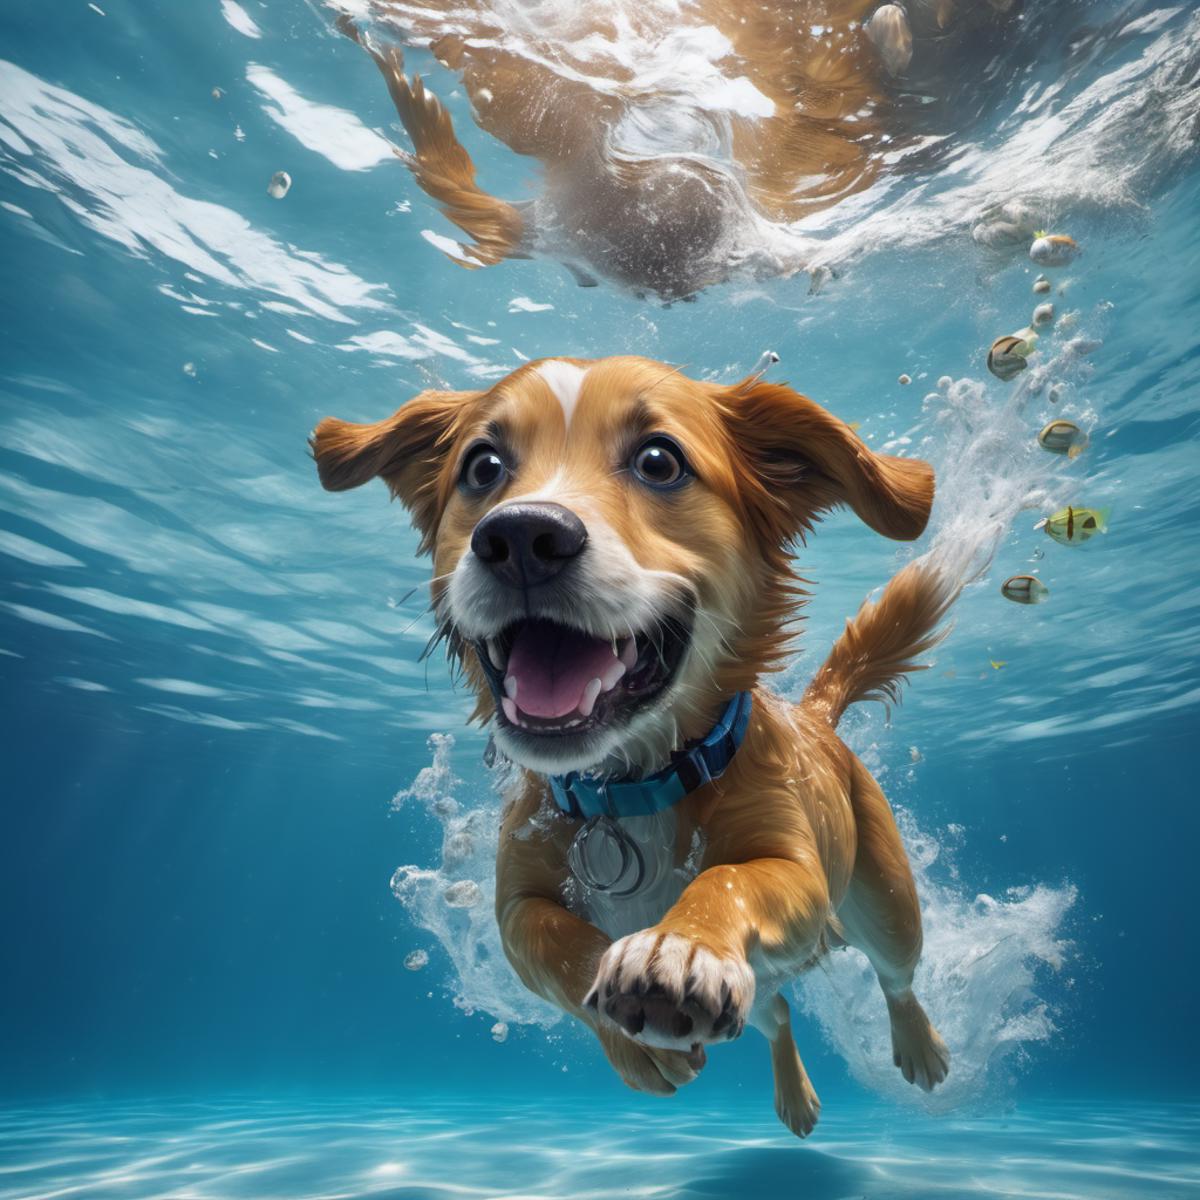 A dog swimming in a body of water with a blue collar on.